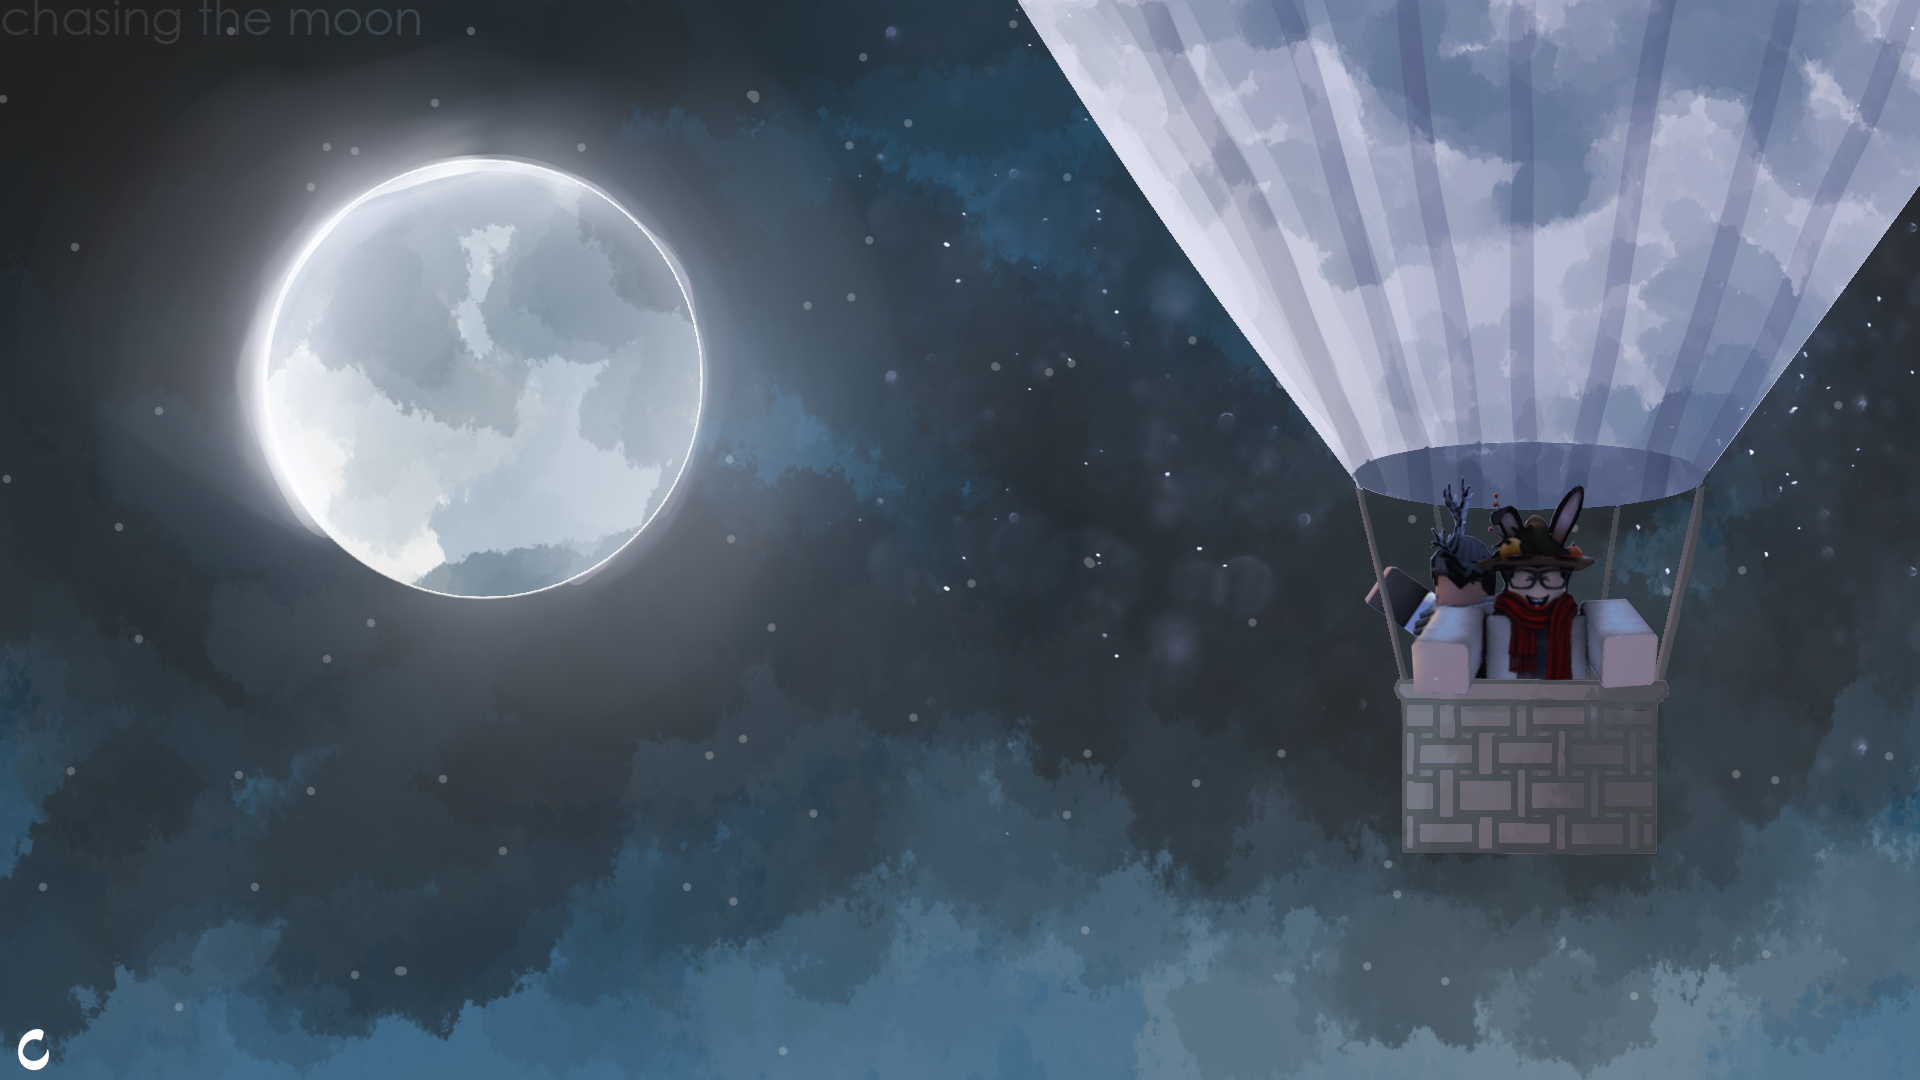 Chasing The Moon Roblox Winning Contest Entry By Chelseasgfx On Deviantart - roblox gfx contest